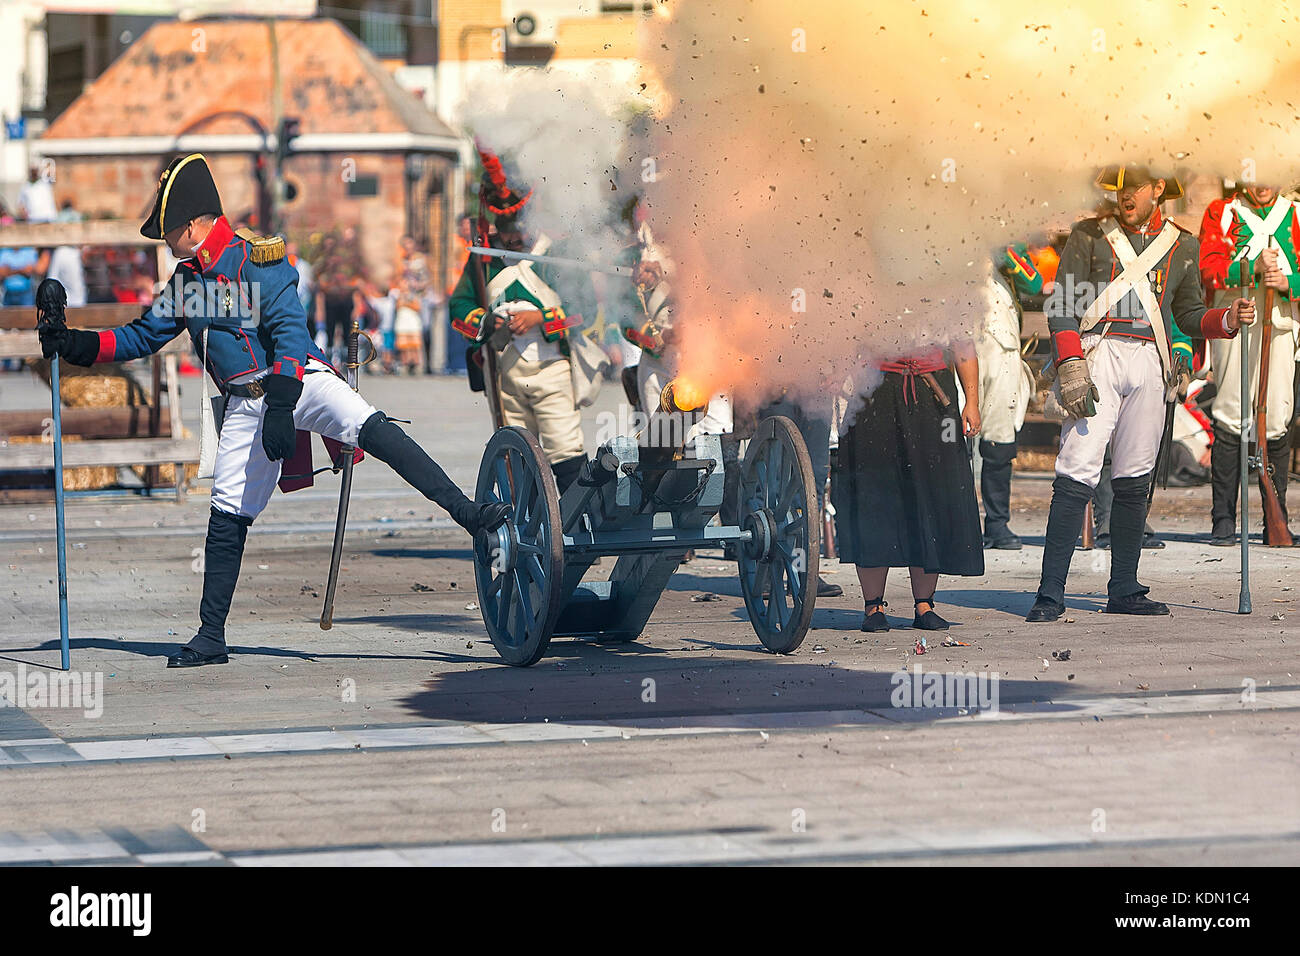 French troops firing cannon on the battlefield during the Representation of the Battle of Bailen, Bailén  Jaén province, Andalusia, Spain Stock Photo